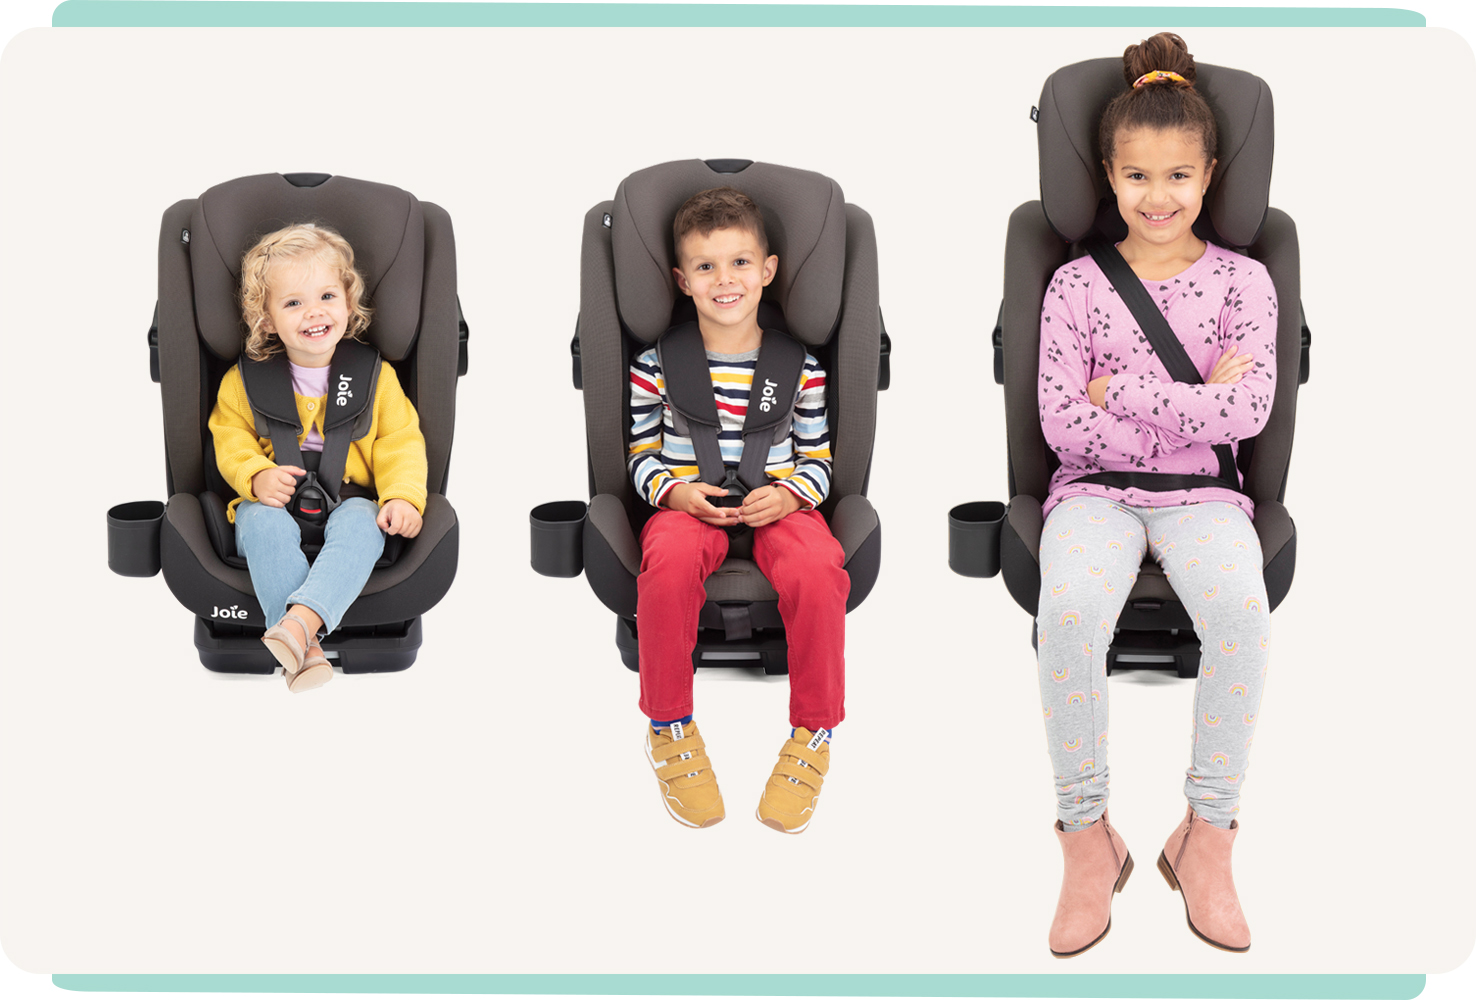 Three children sitting beside each other in their own Joie bold toddler car seat at different stages of growth.